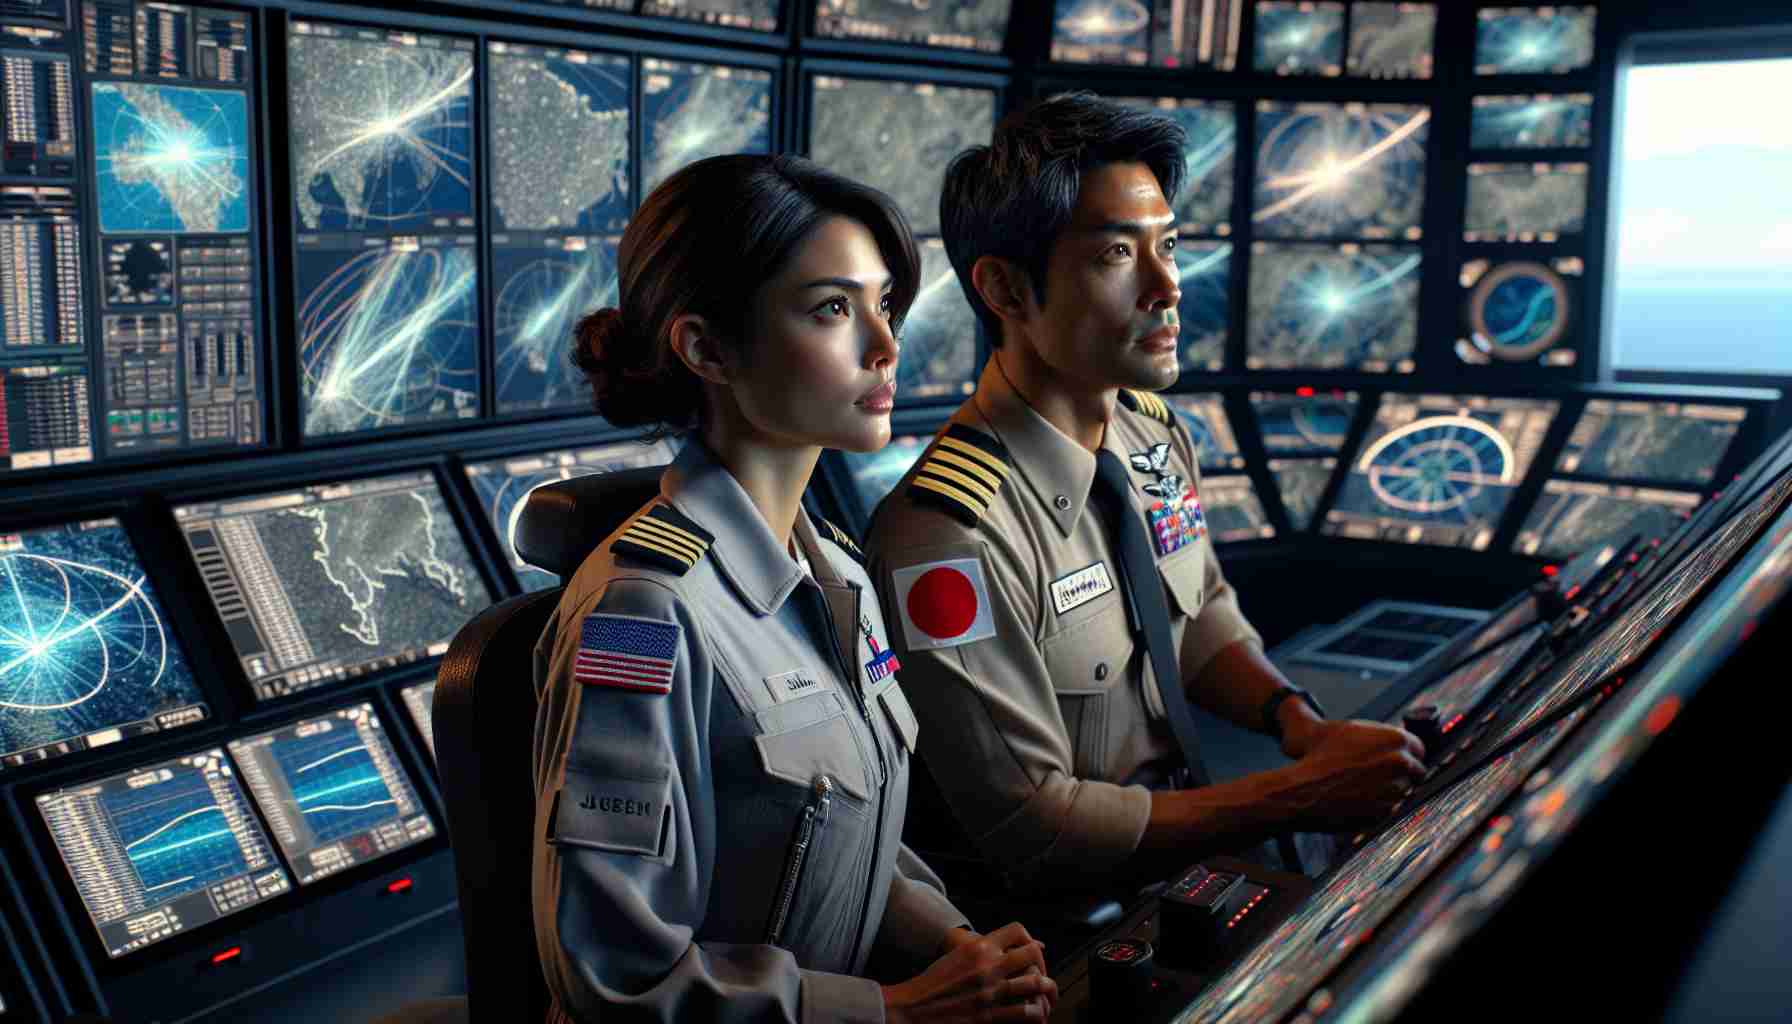 Japan’s Maritime Self-Defense Force Pilots SpaceX’s Starlink Internet Service